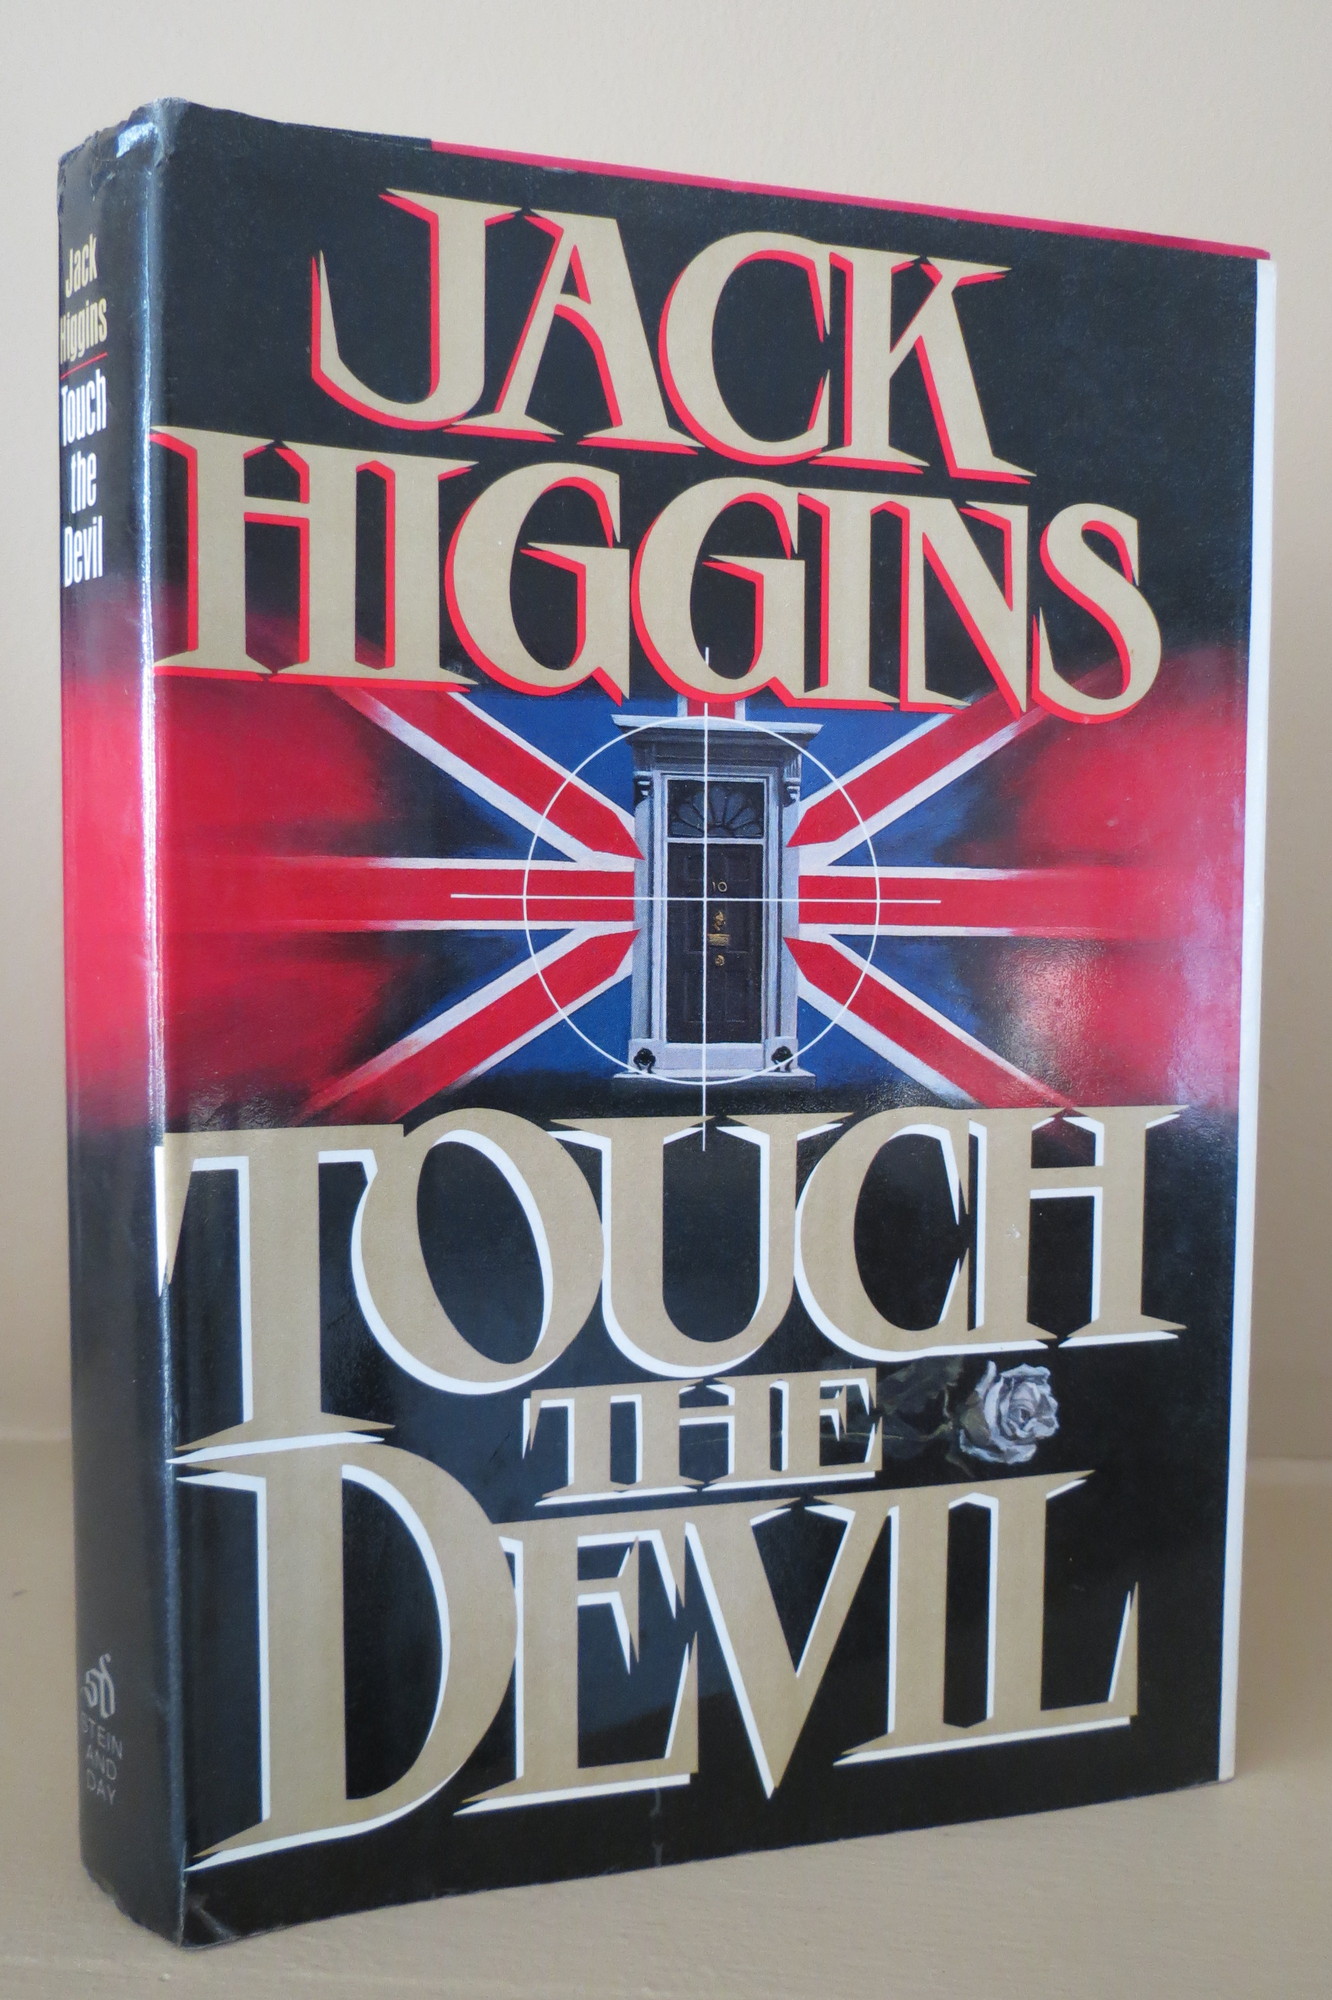 Image for TOUCH THE DEVIL  (DJ protected by clear, acid-free mylar cover)